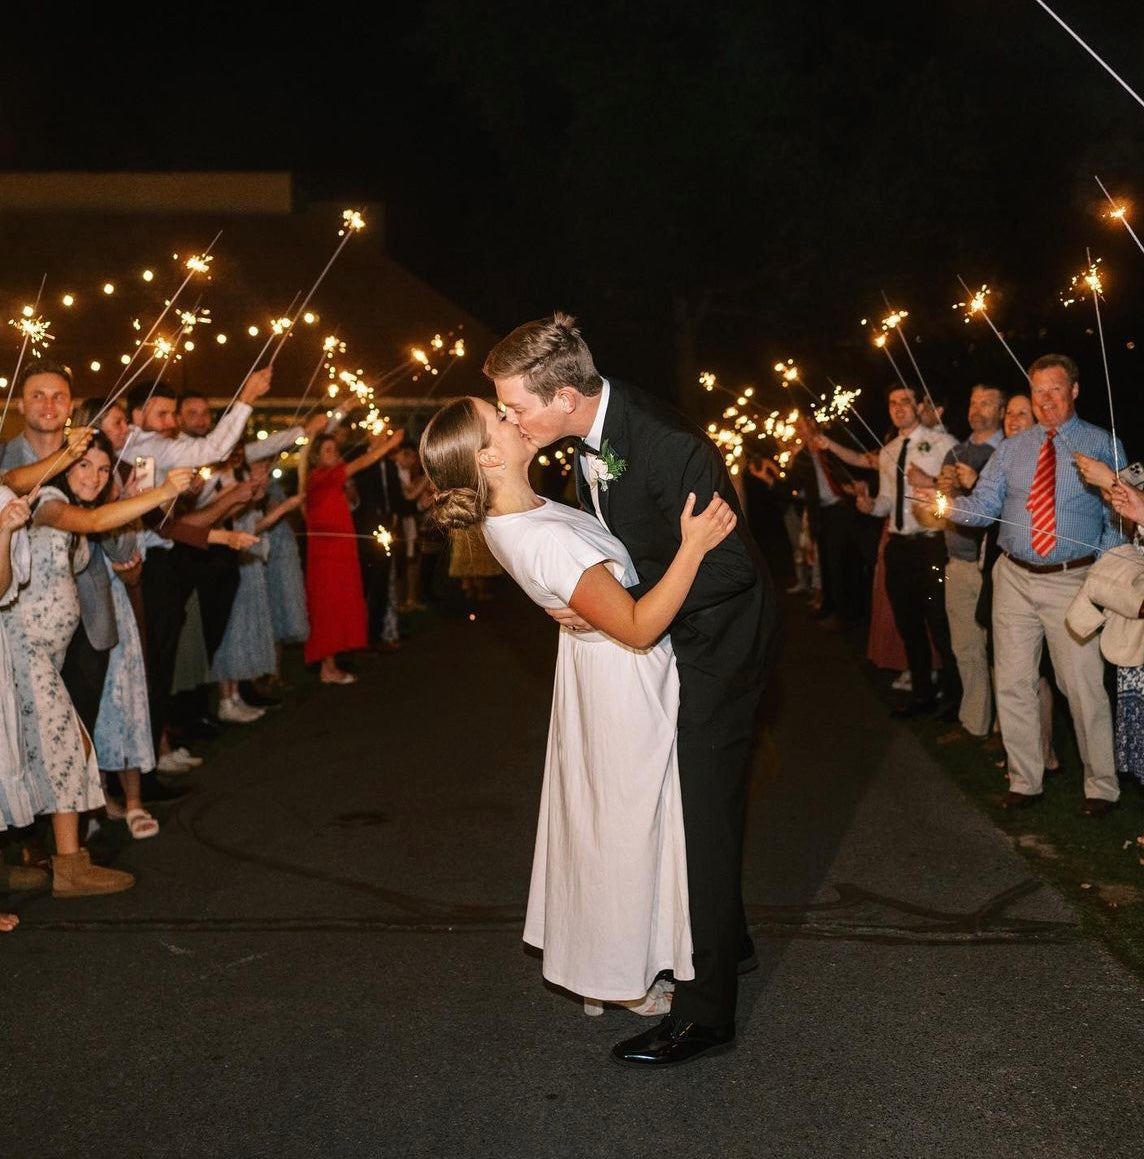 Extinguishing Sparklers: The Finishing Touch to Your Wedding Send Off